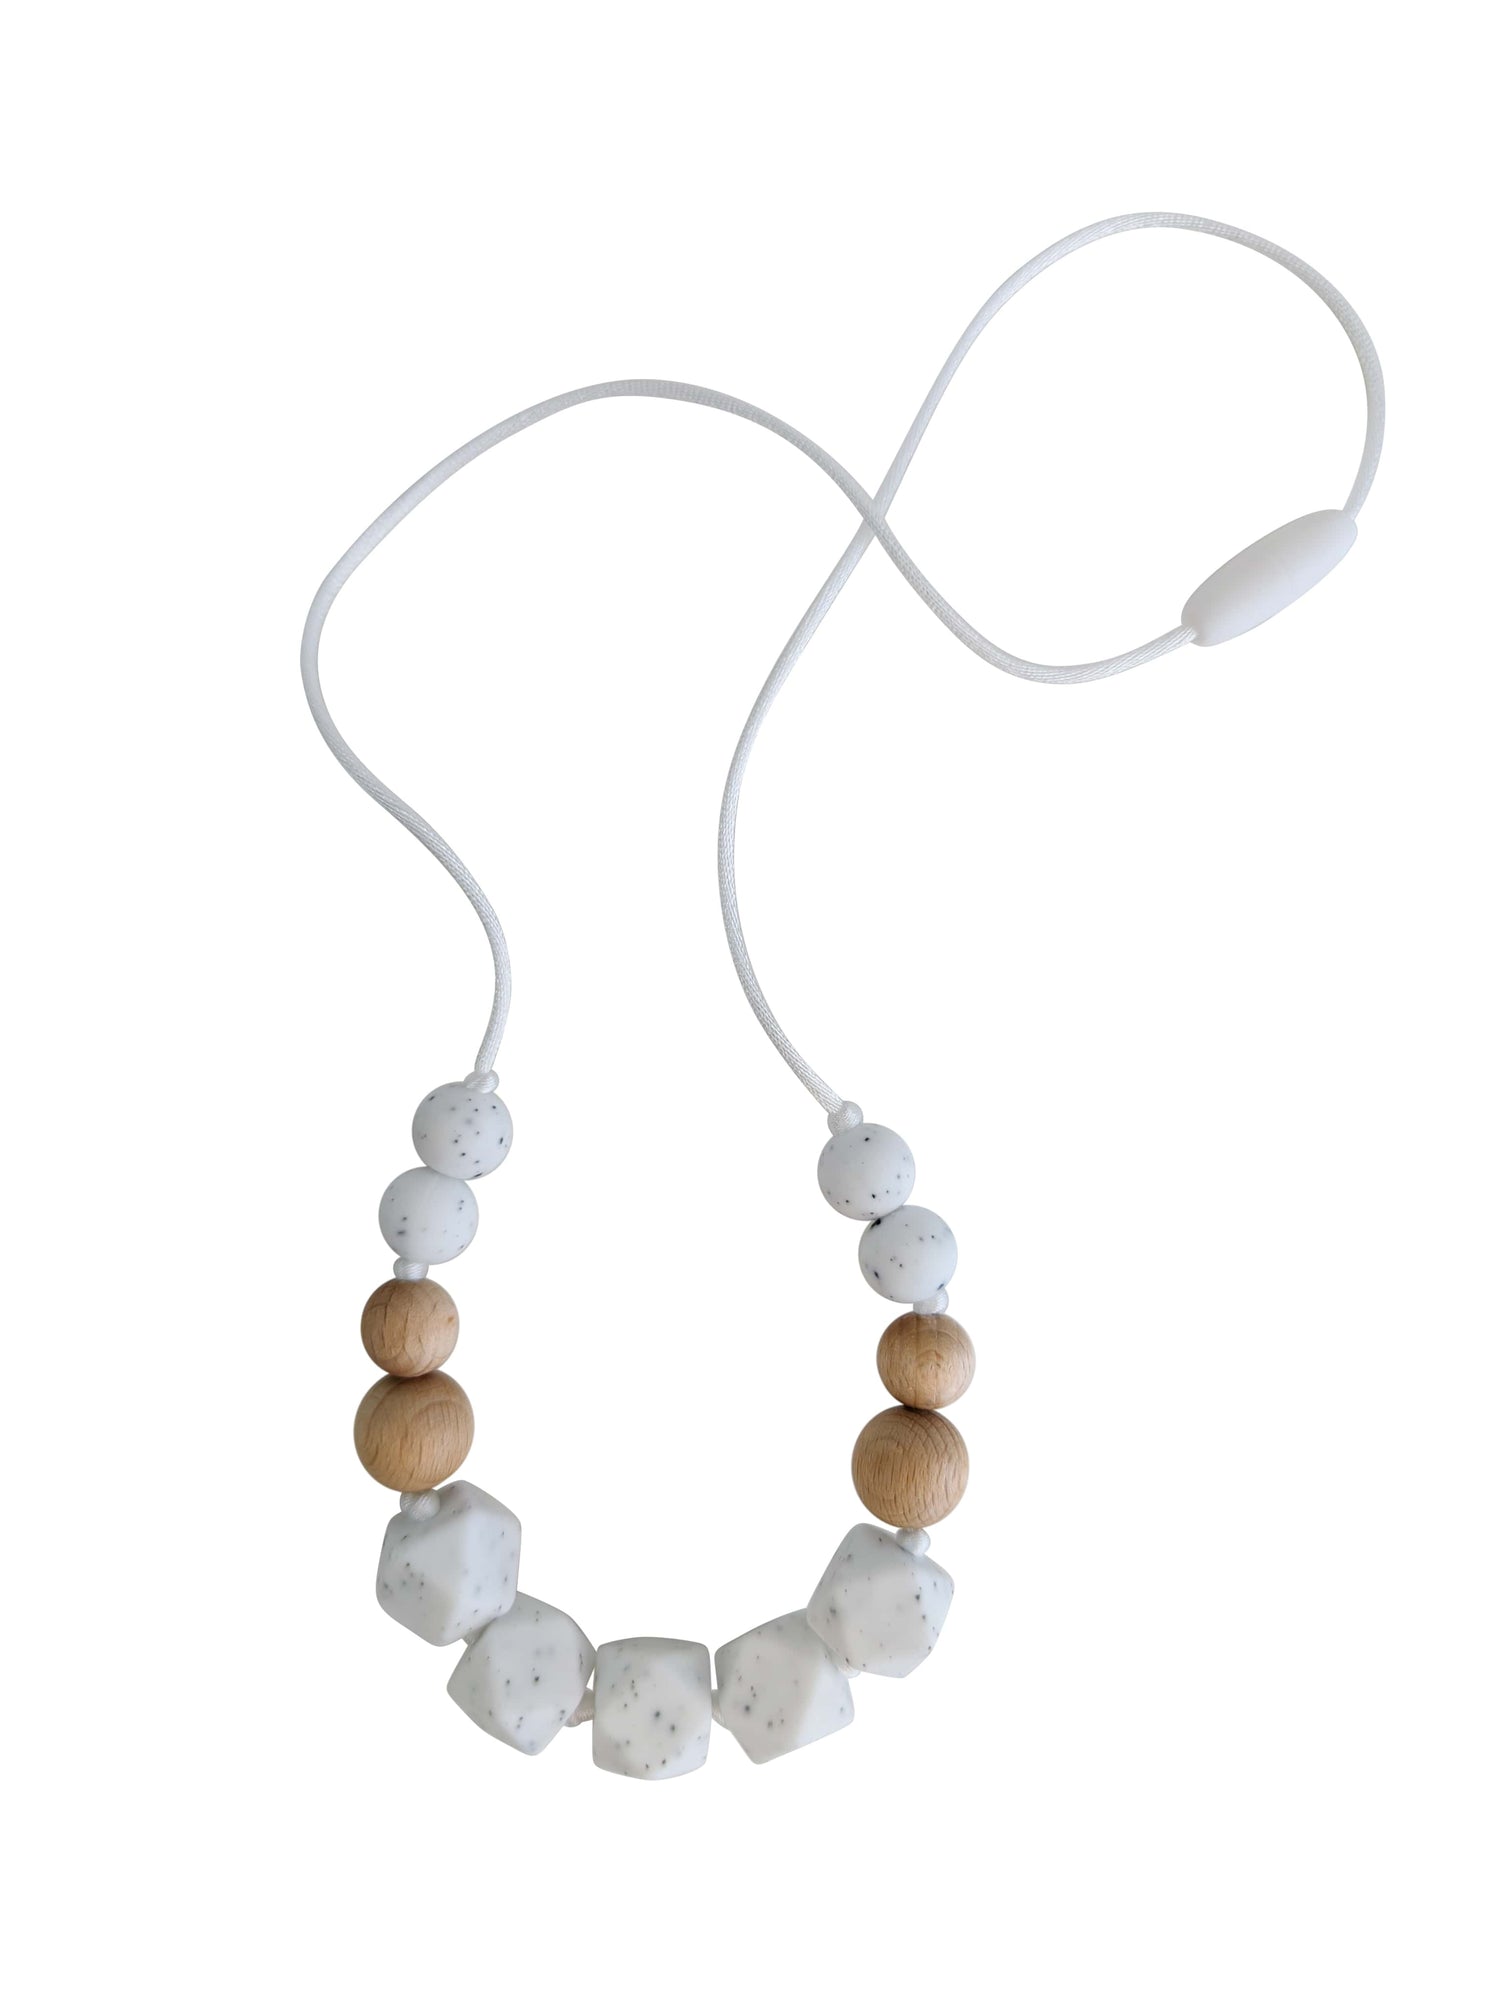 Speckled and wood beads teething necklace